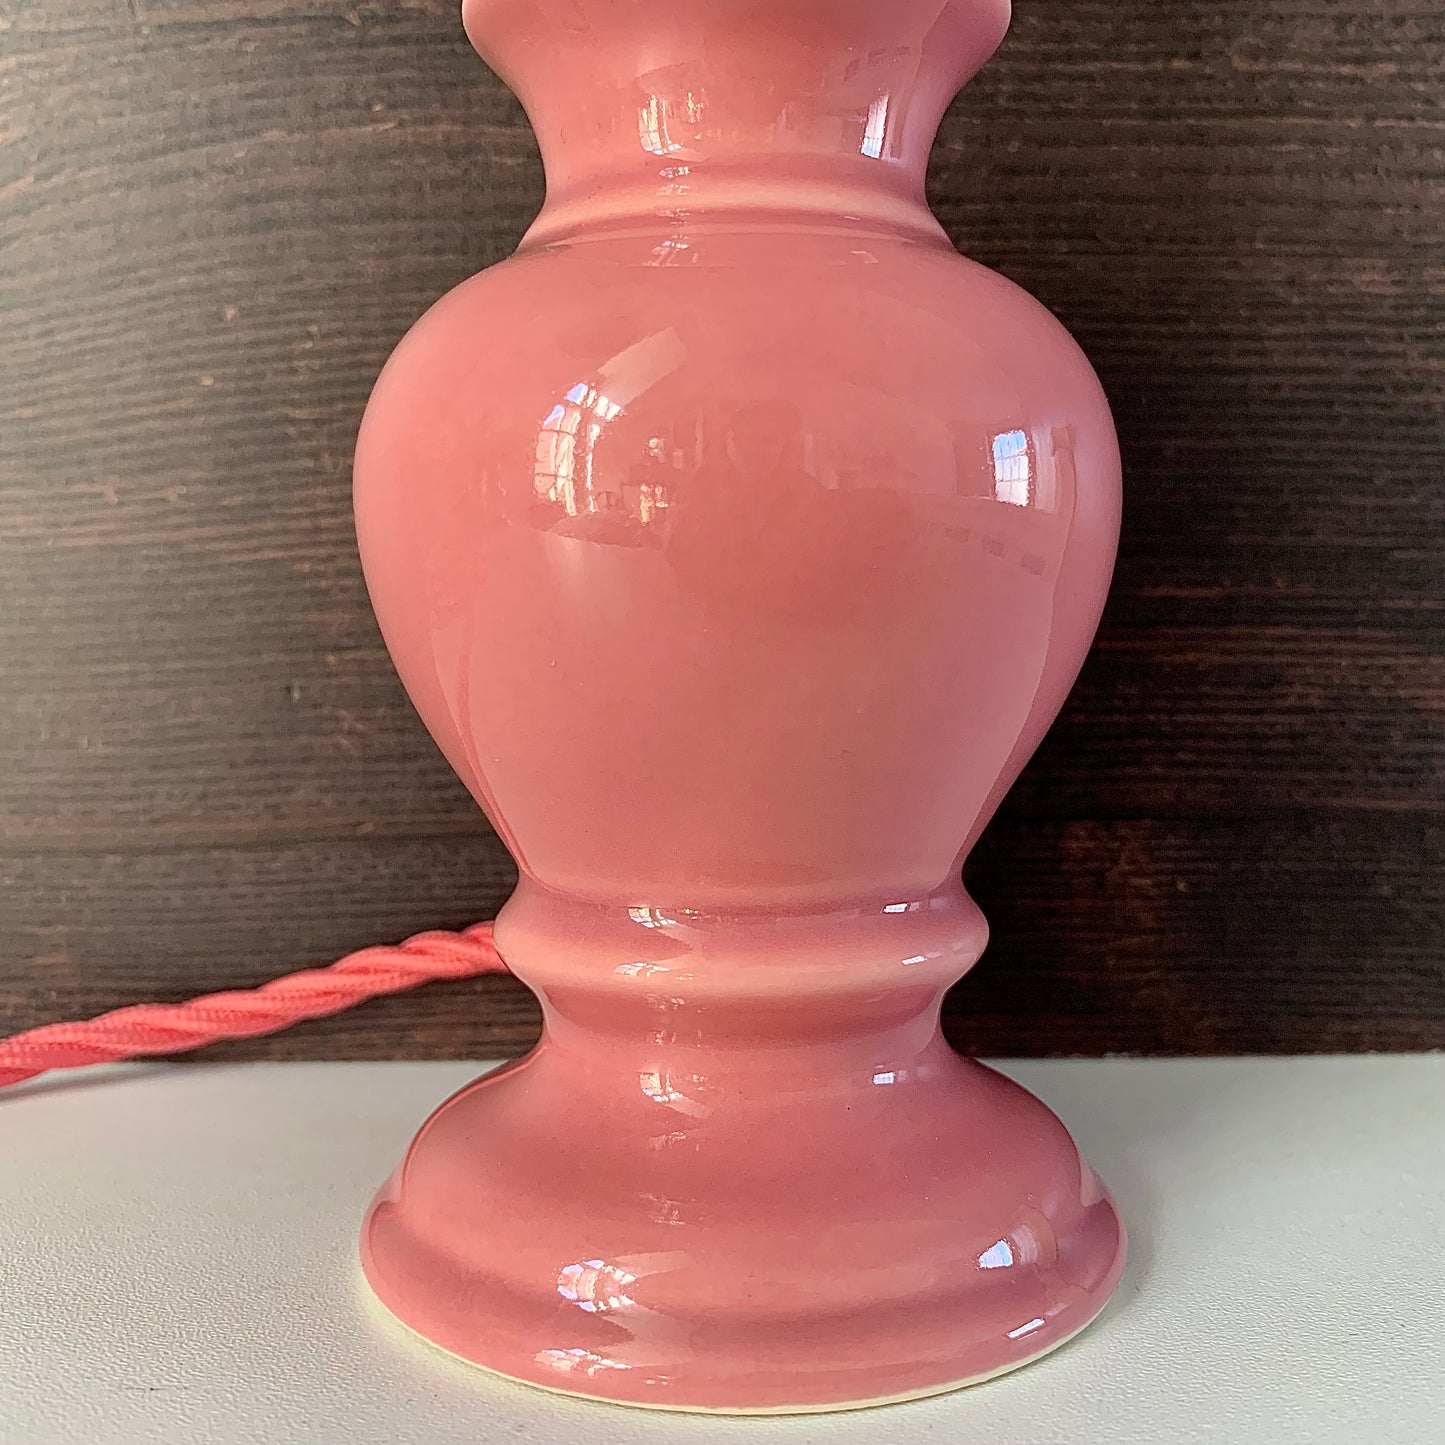 Vintage British English Pink Ceramic Table Lamp 1970s 1980s Staffordshire Pottery